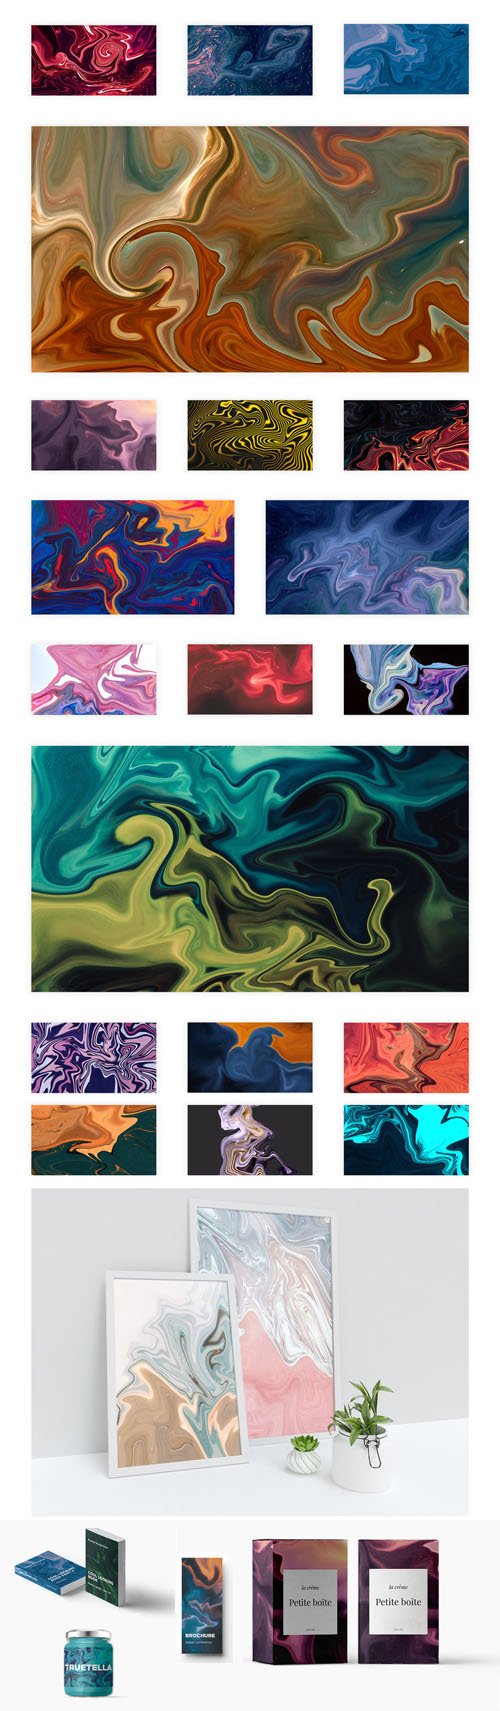 50 Swirl Textures Pack